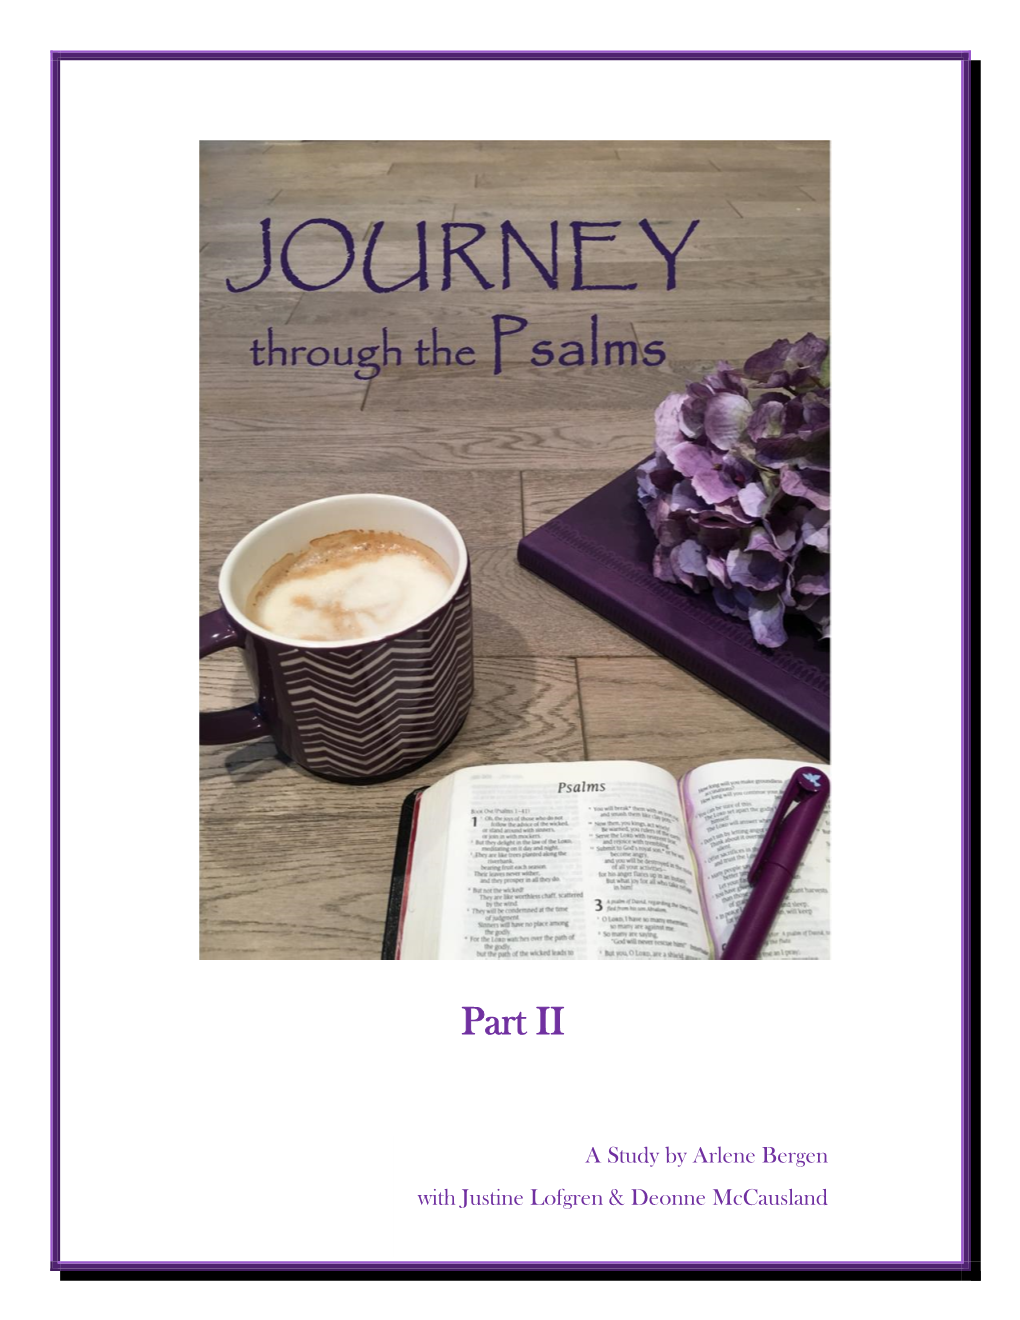 Journey Through the Psalms We Have Not Spent Much Time Looking at Context